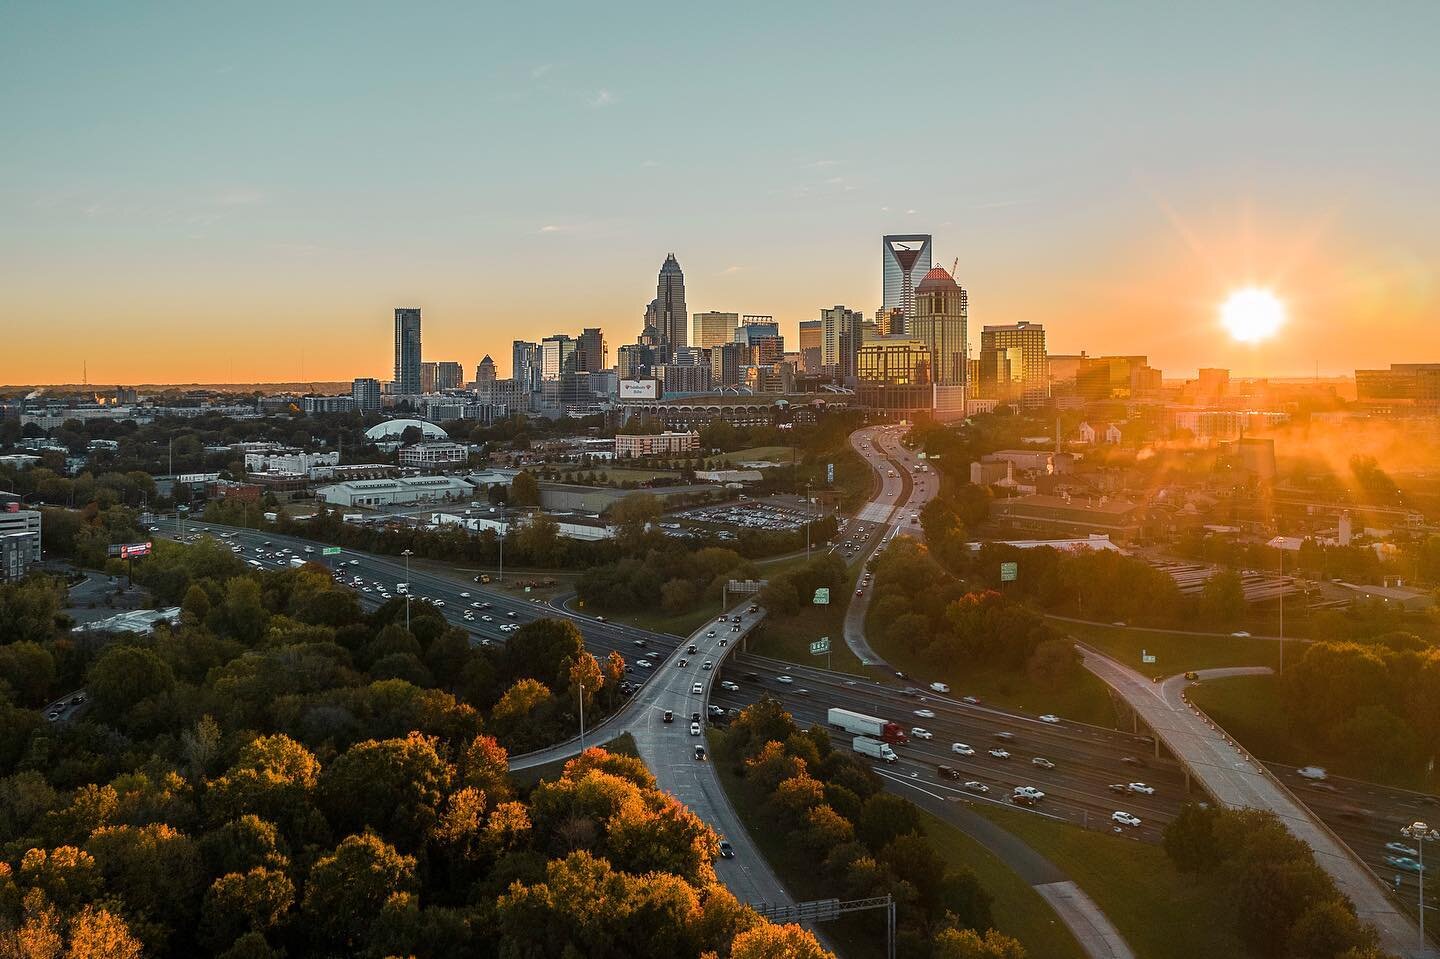 How about a sunrise to start your Monday off right?
.
.
.
#clt  #cltnc #cltphotographer #queencity #charlottephoto #charlottevideo #mysecretcharlotte #704 #cltreels